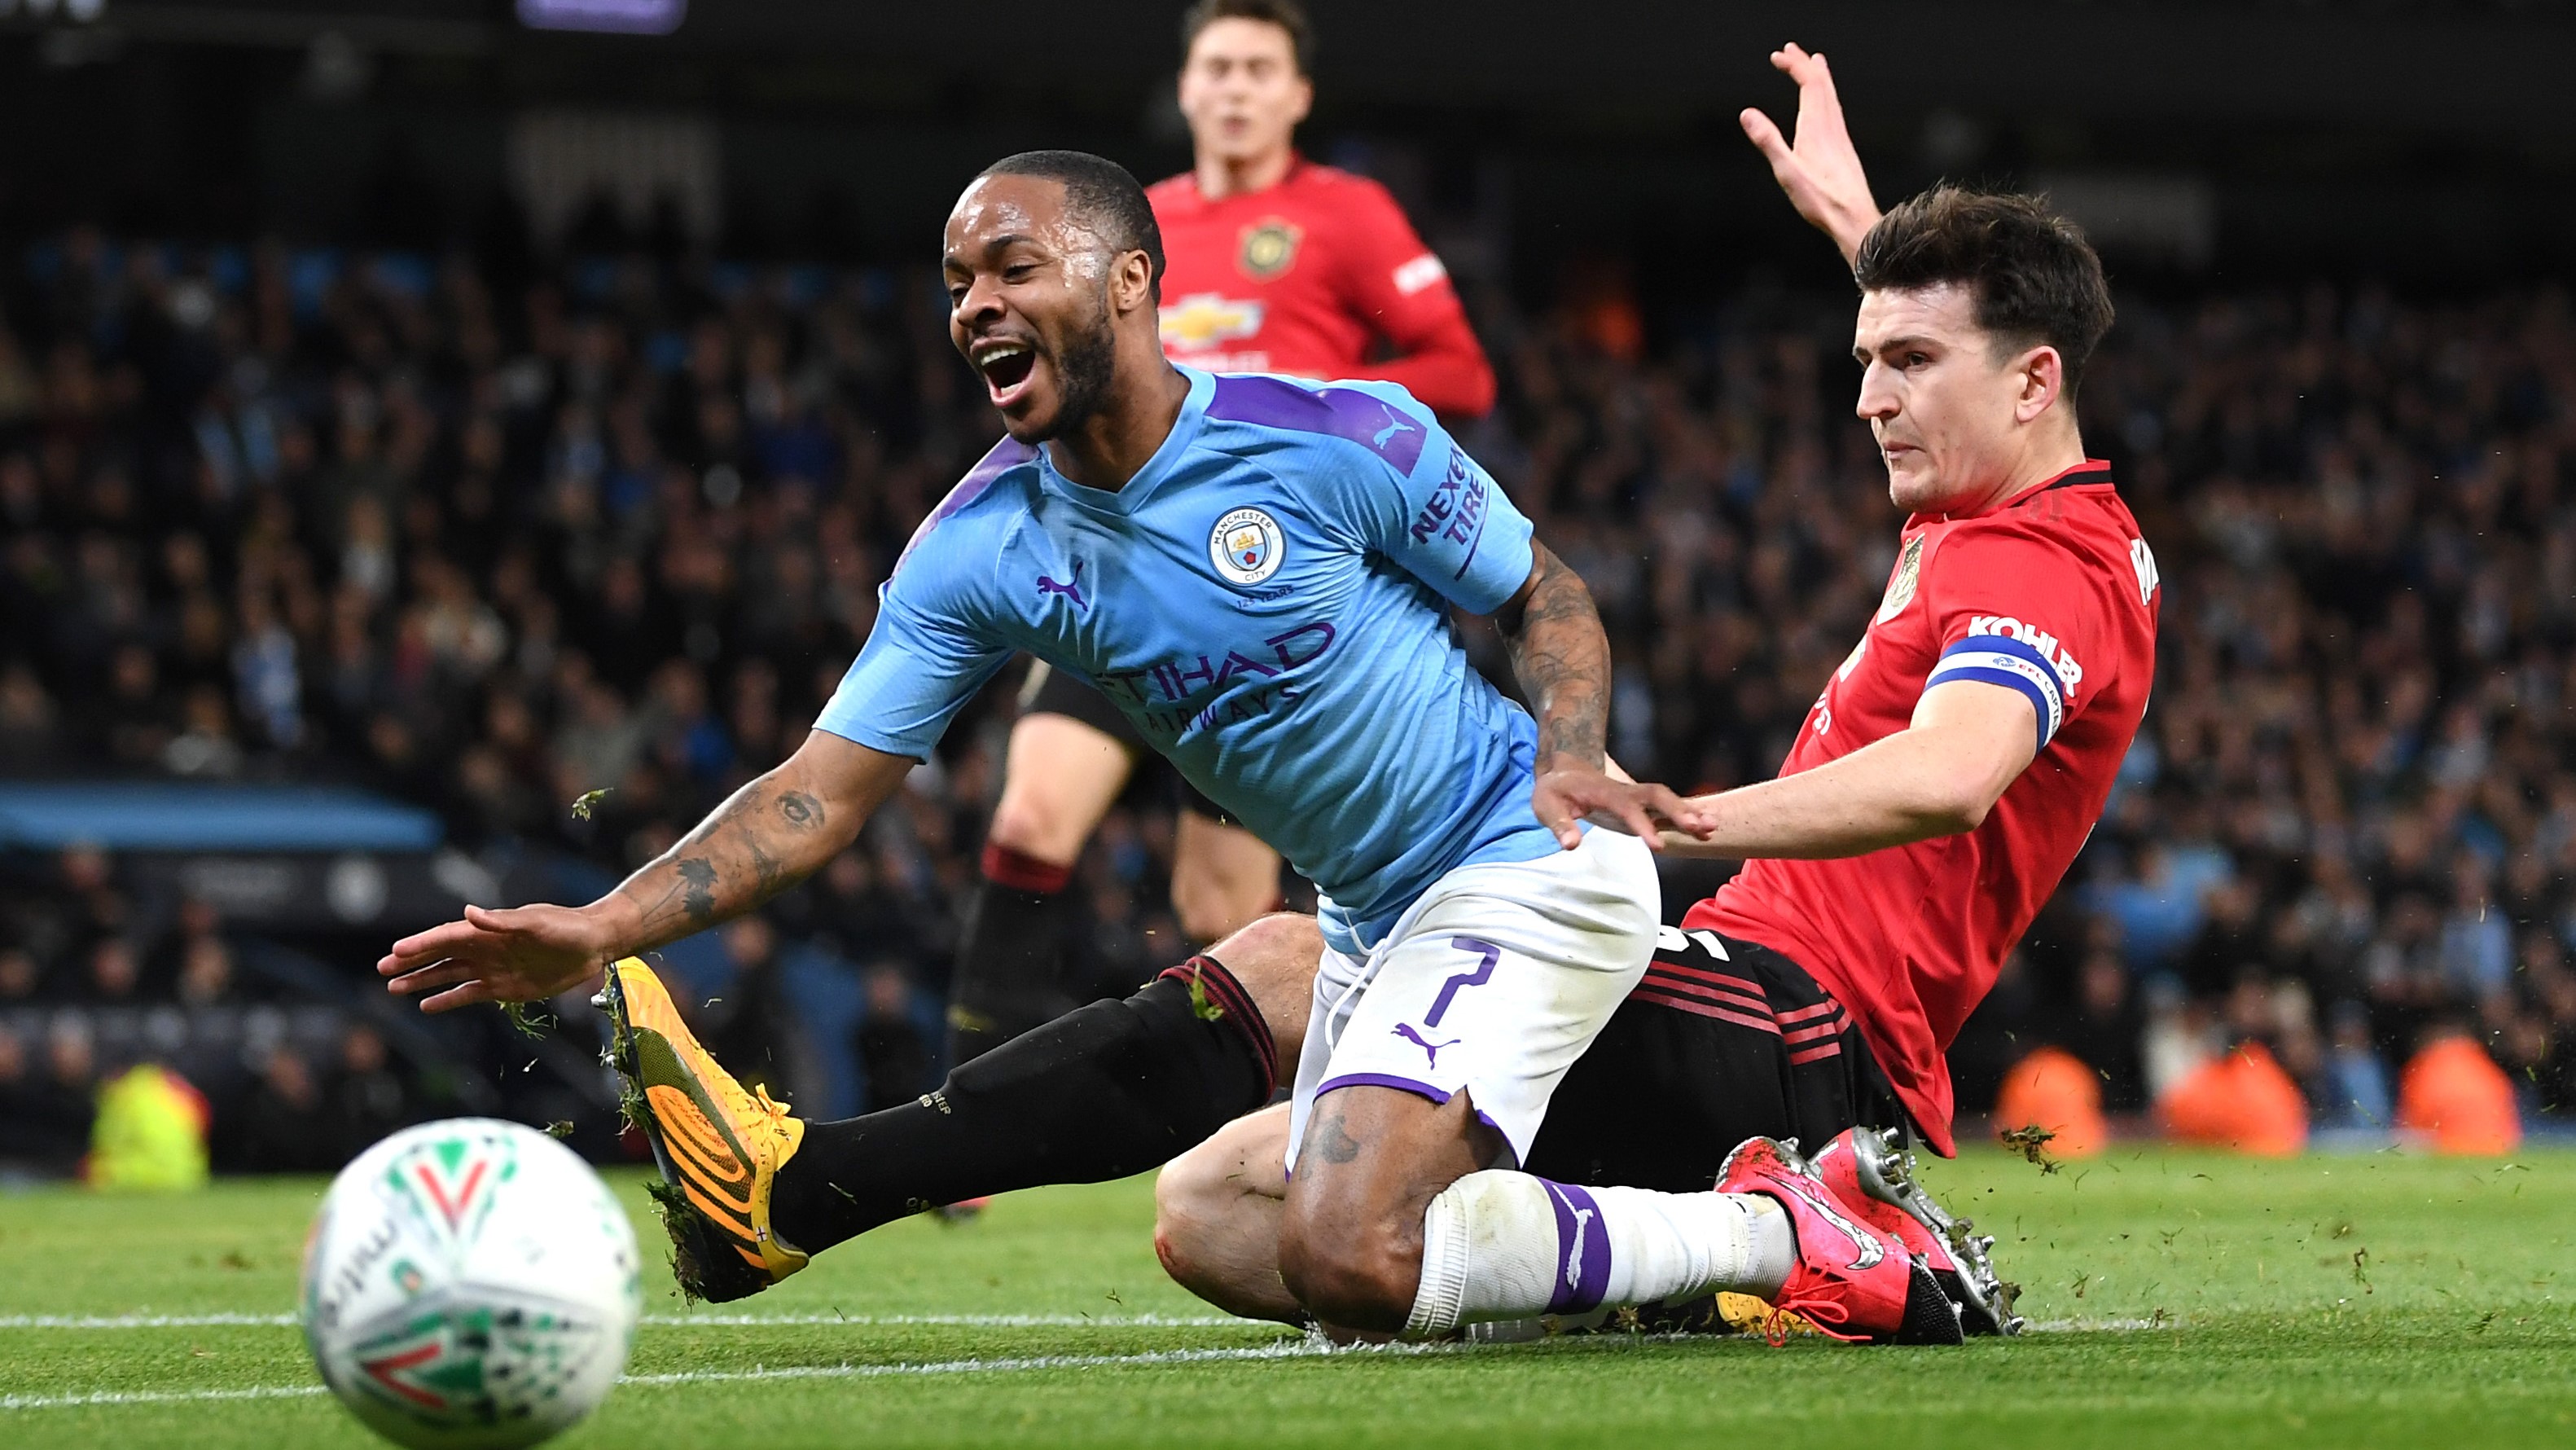 Man United vs Man City live stream: how to watch Carabao Cup semi-final